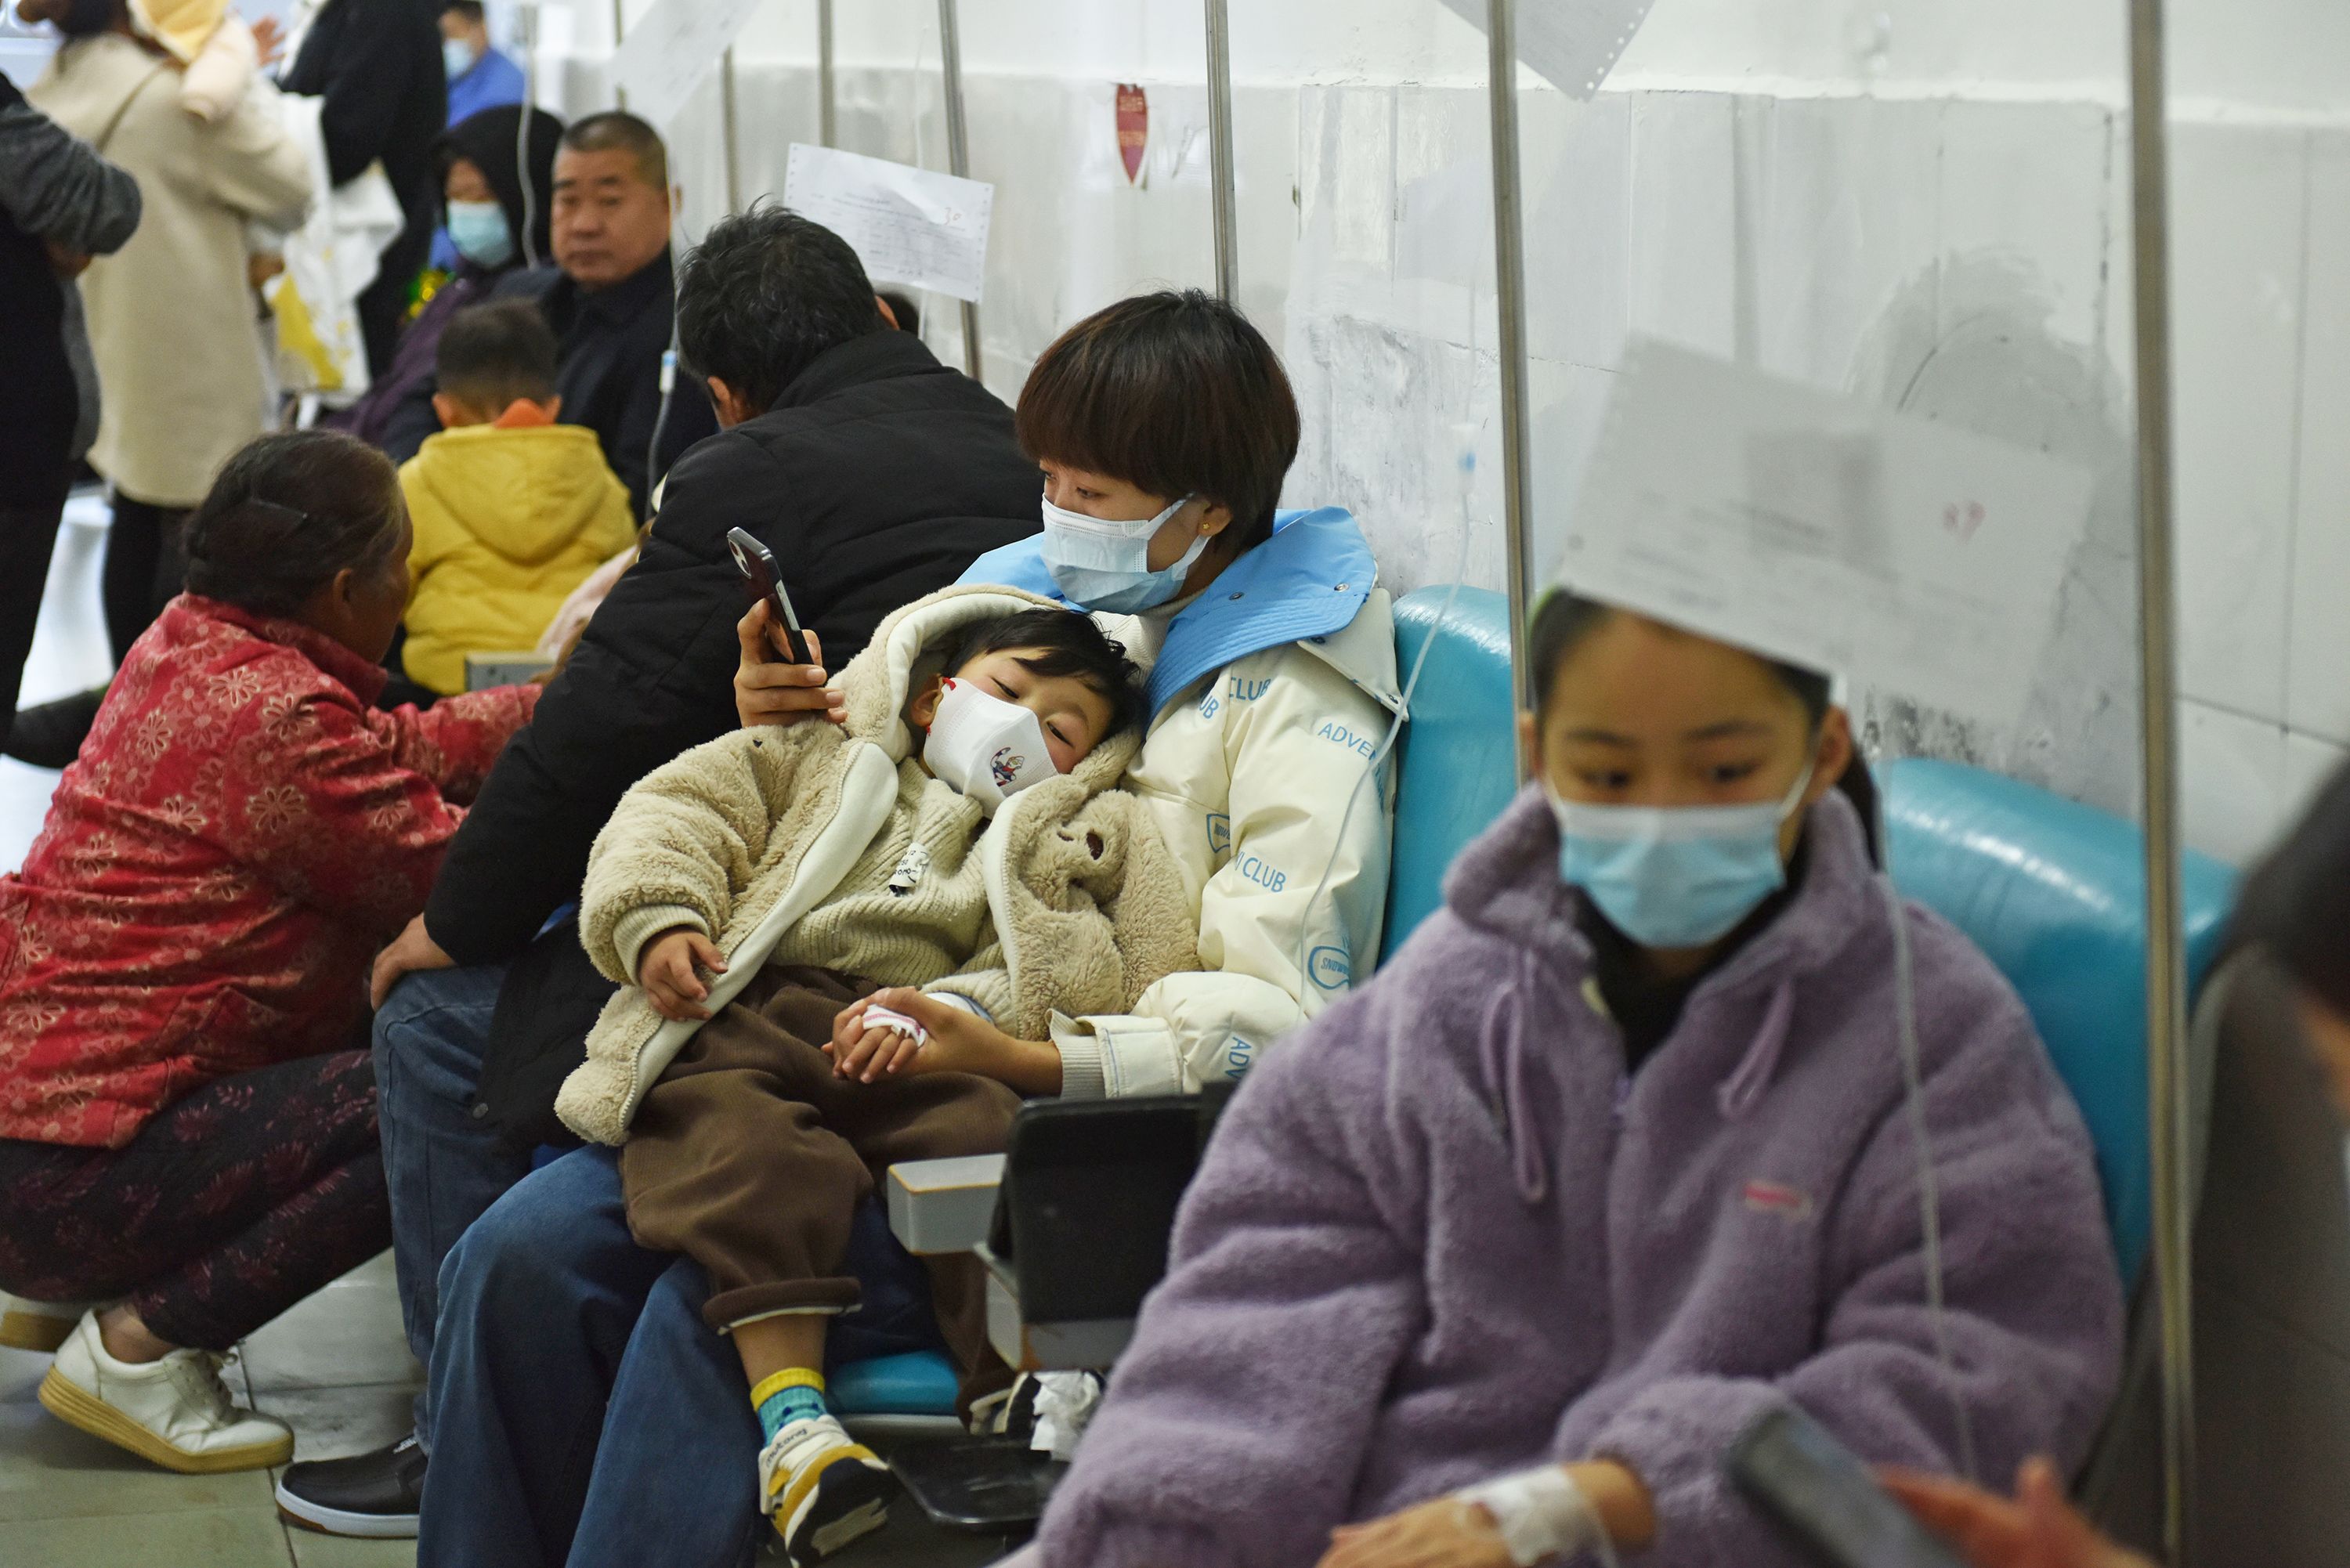 Sick children, accompanied by their parents, are receiving infusion treatment at the Department of Pediatrics of the People's Hospital in Fuyang, China, on November 28, 2023. (Photo by Costfoto/NurPhoto via Getty Images)